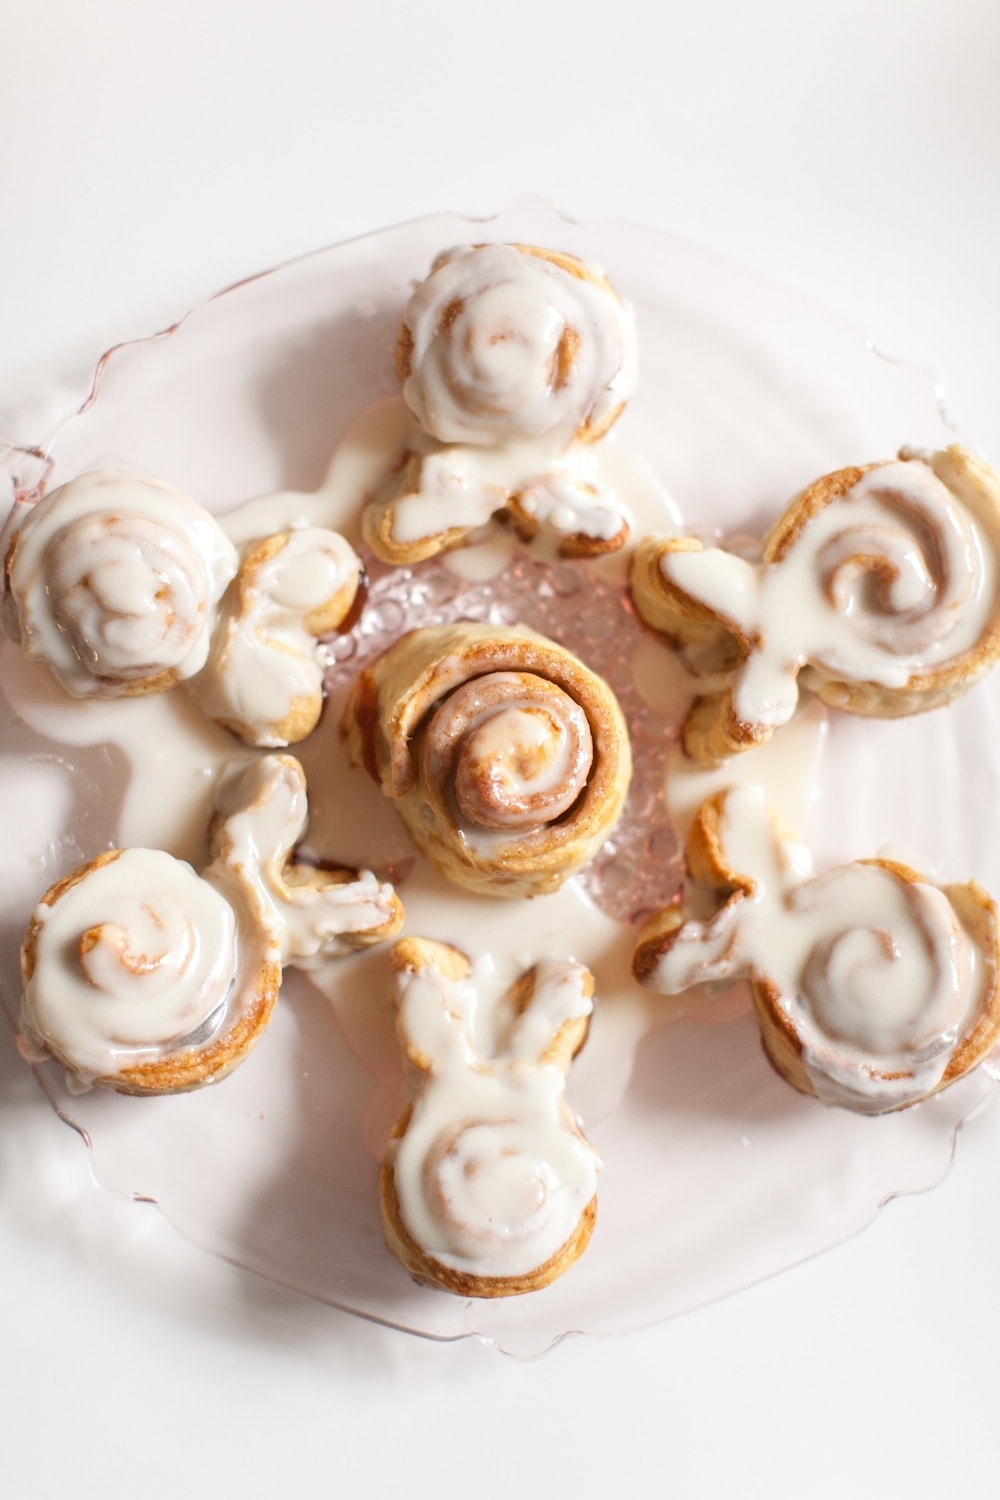 Cinnamon rolls in the shape of a snowflake.